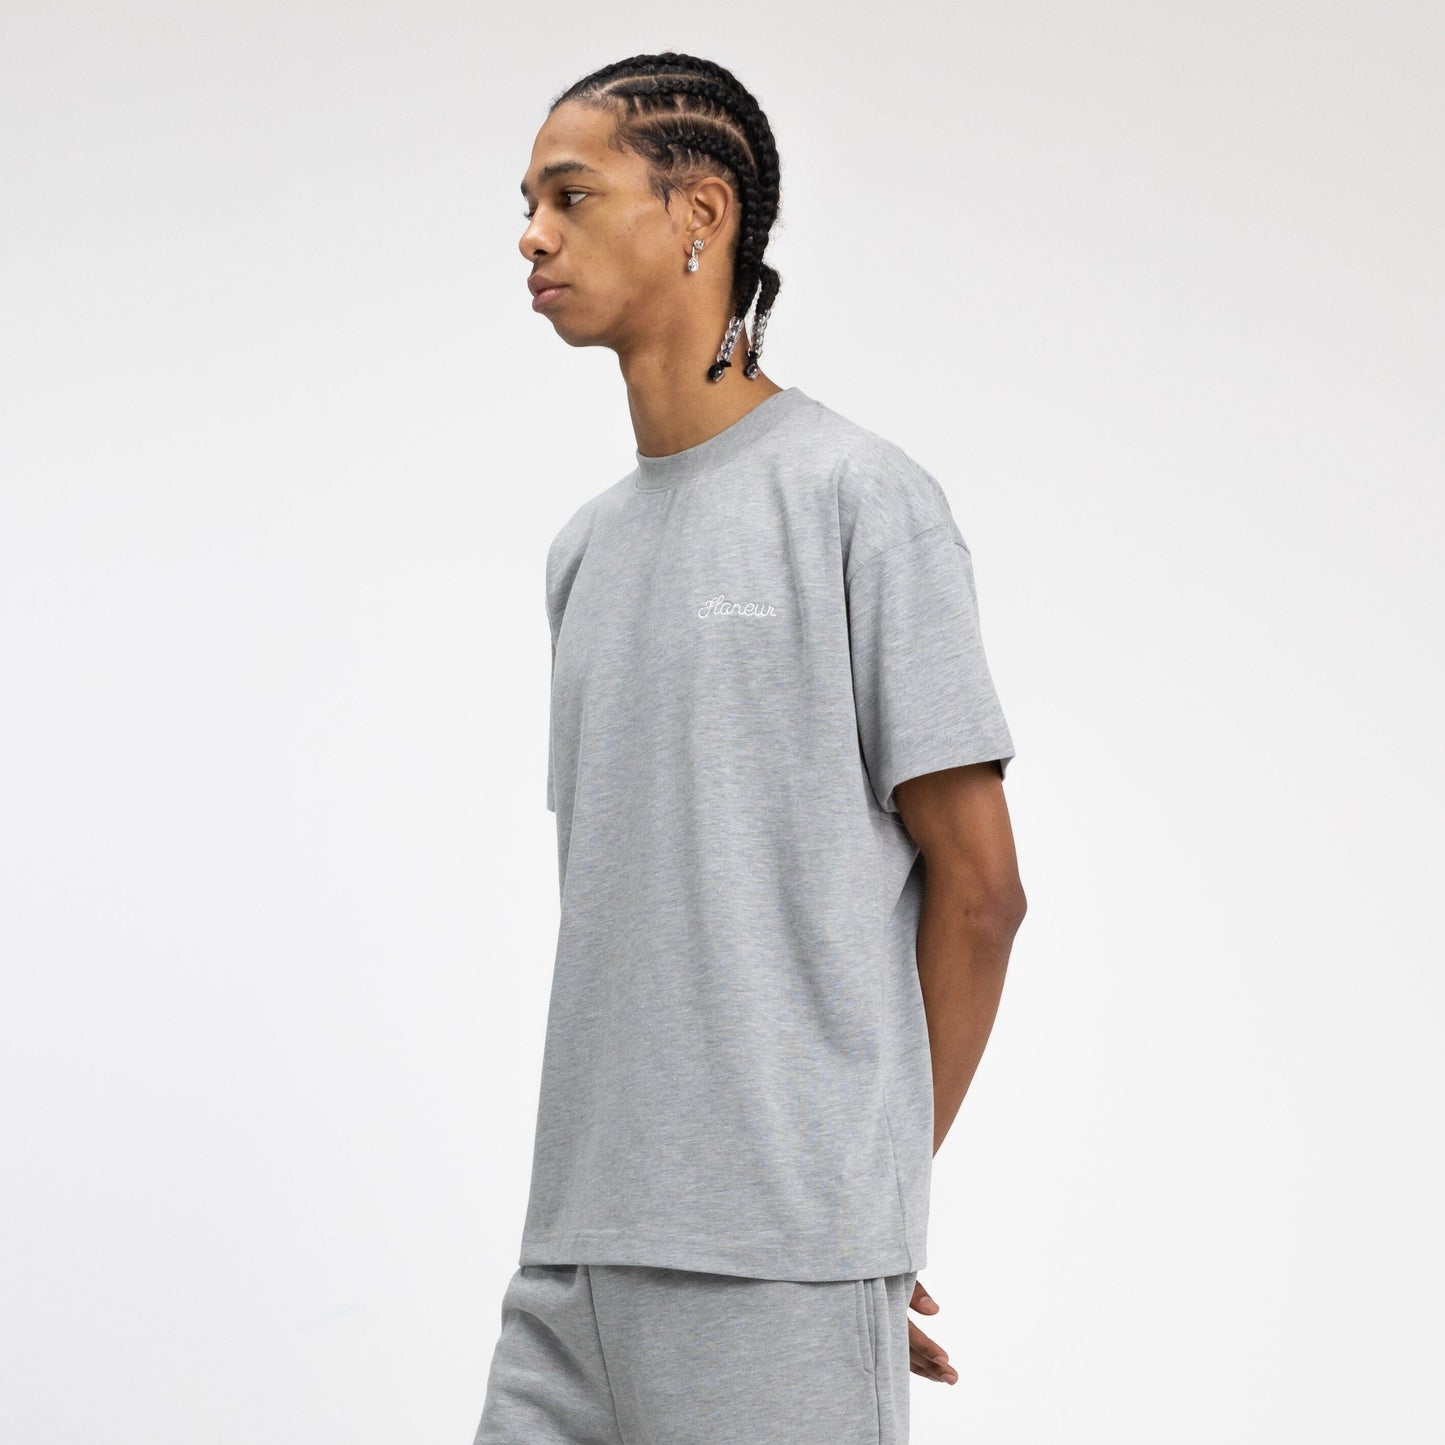 'Flaneur' Signature T-Shirt in Heather Grey